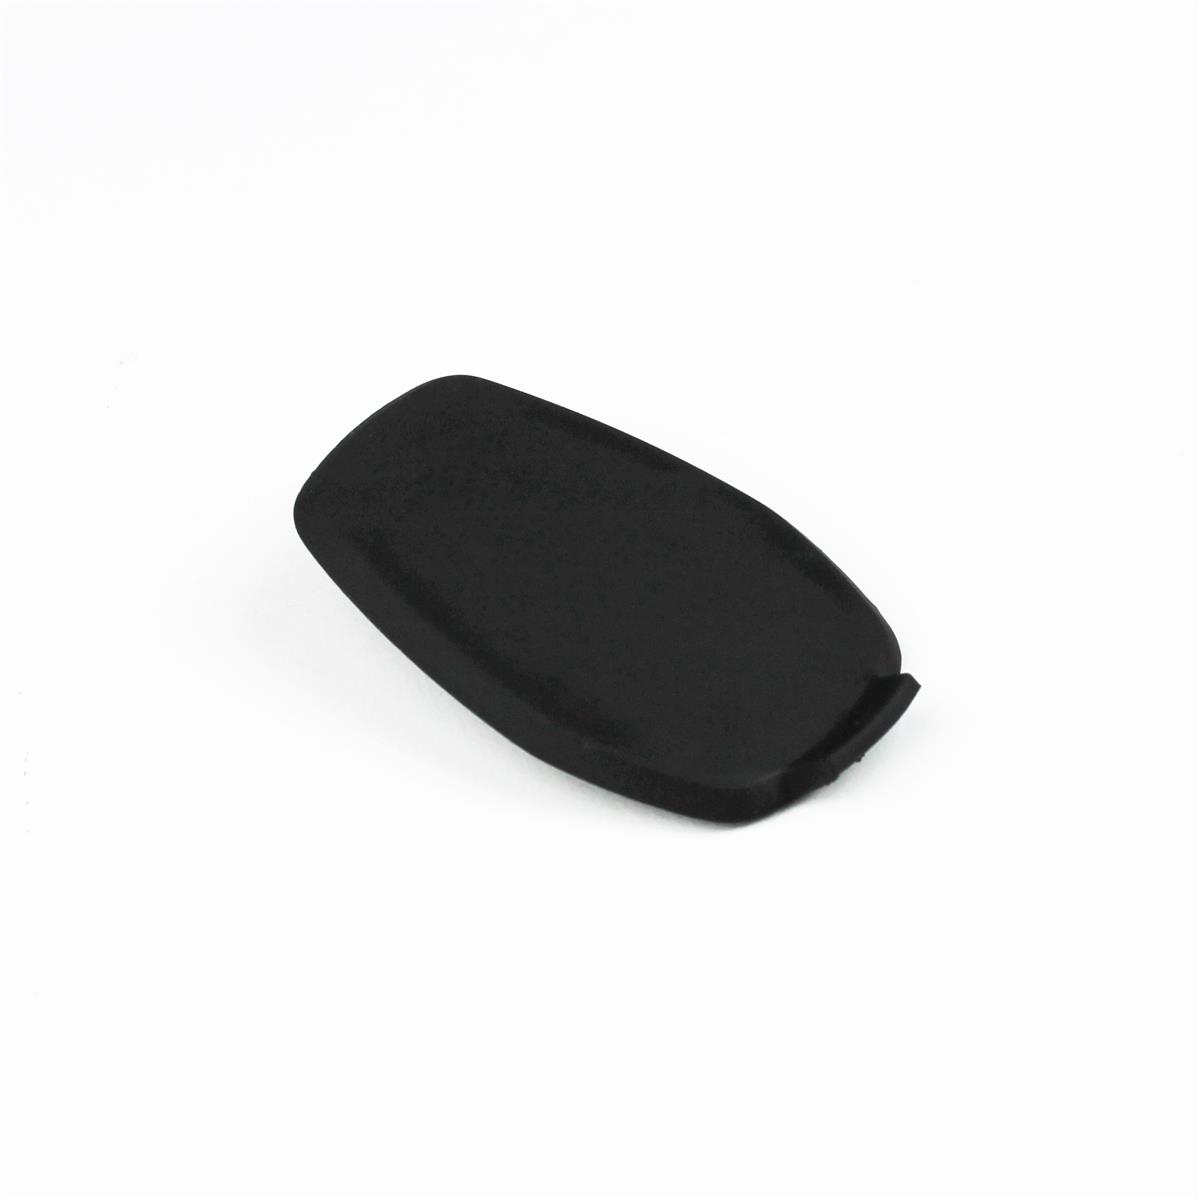 Rubber cover for charging port for Jarifa2 and Aventura2 with Bosch drive unit